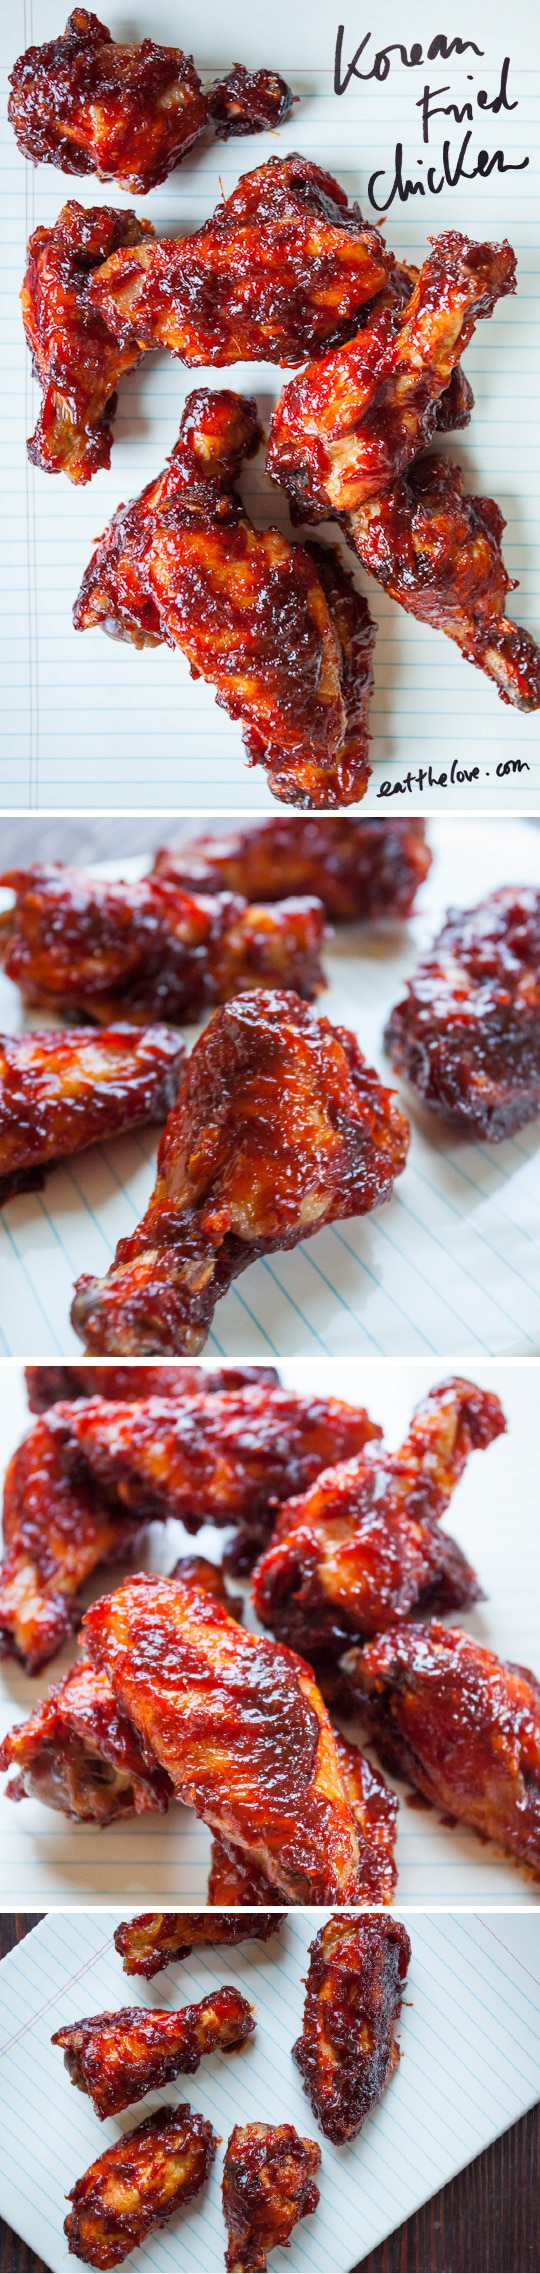 Korean Fried Chicken Recipe that is baked not fried! Recipe and Photos by Irvin Lin of Eat the Love.